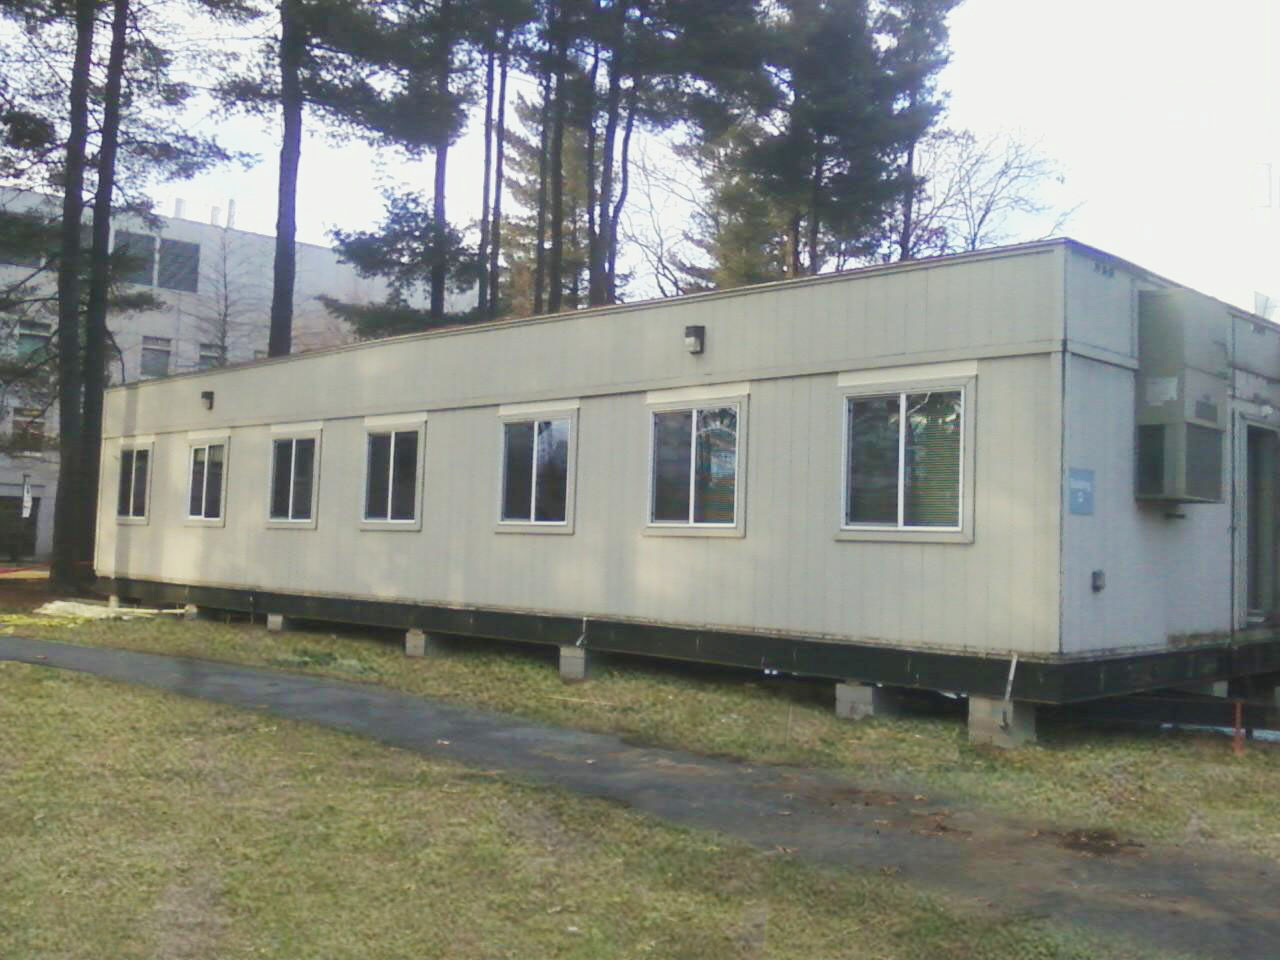 Find a Used Modular Building or Classroom Locally1280 x 960